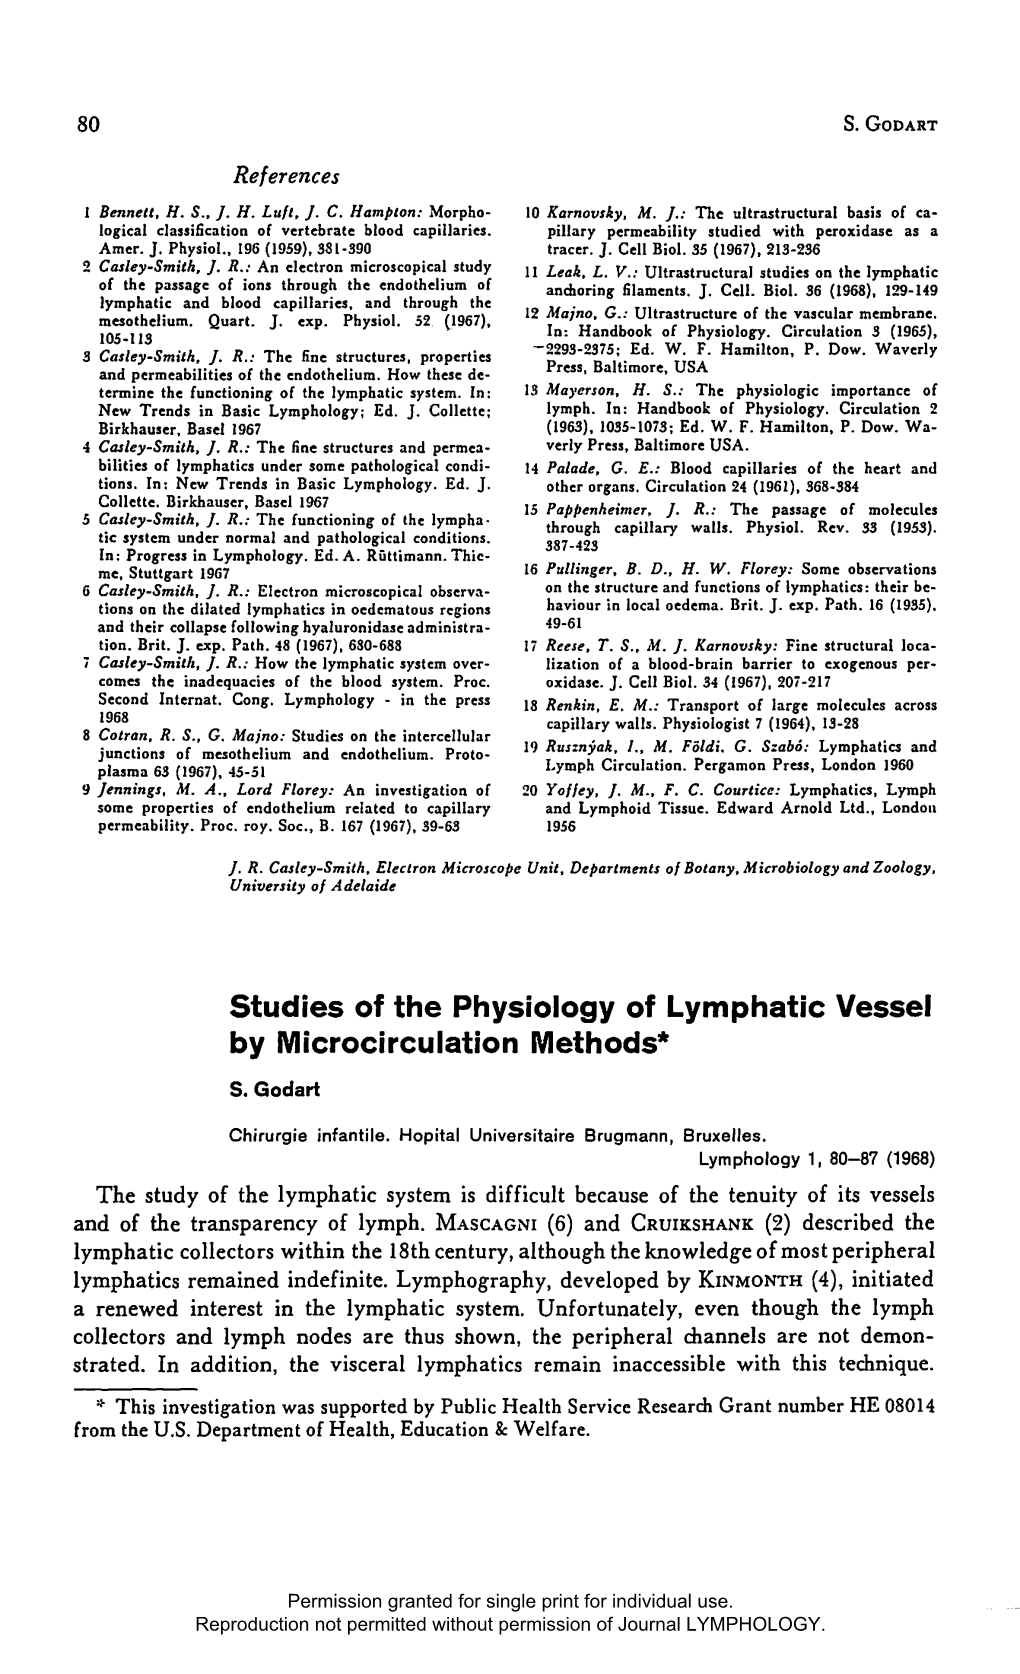 Studies of the Physiology of Lymphatic Vessel by Microcirculation Methods*